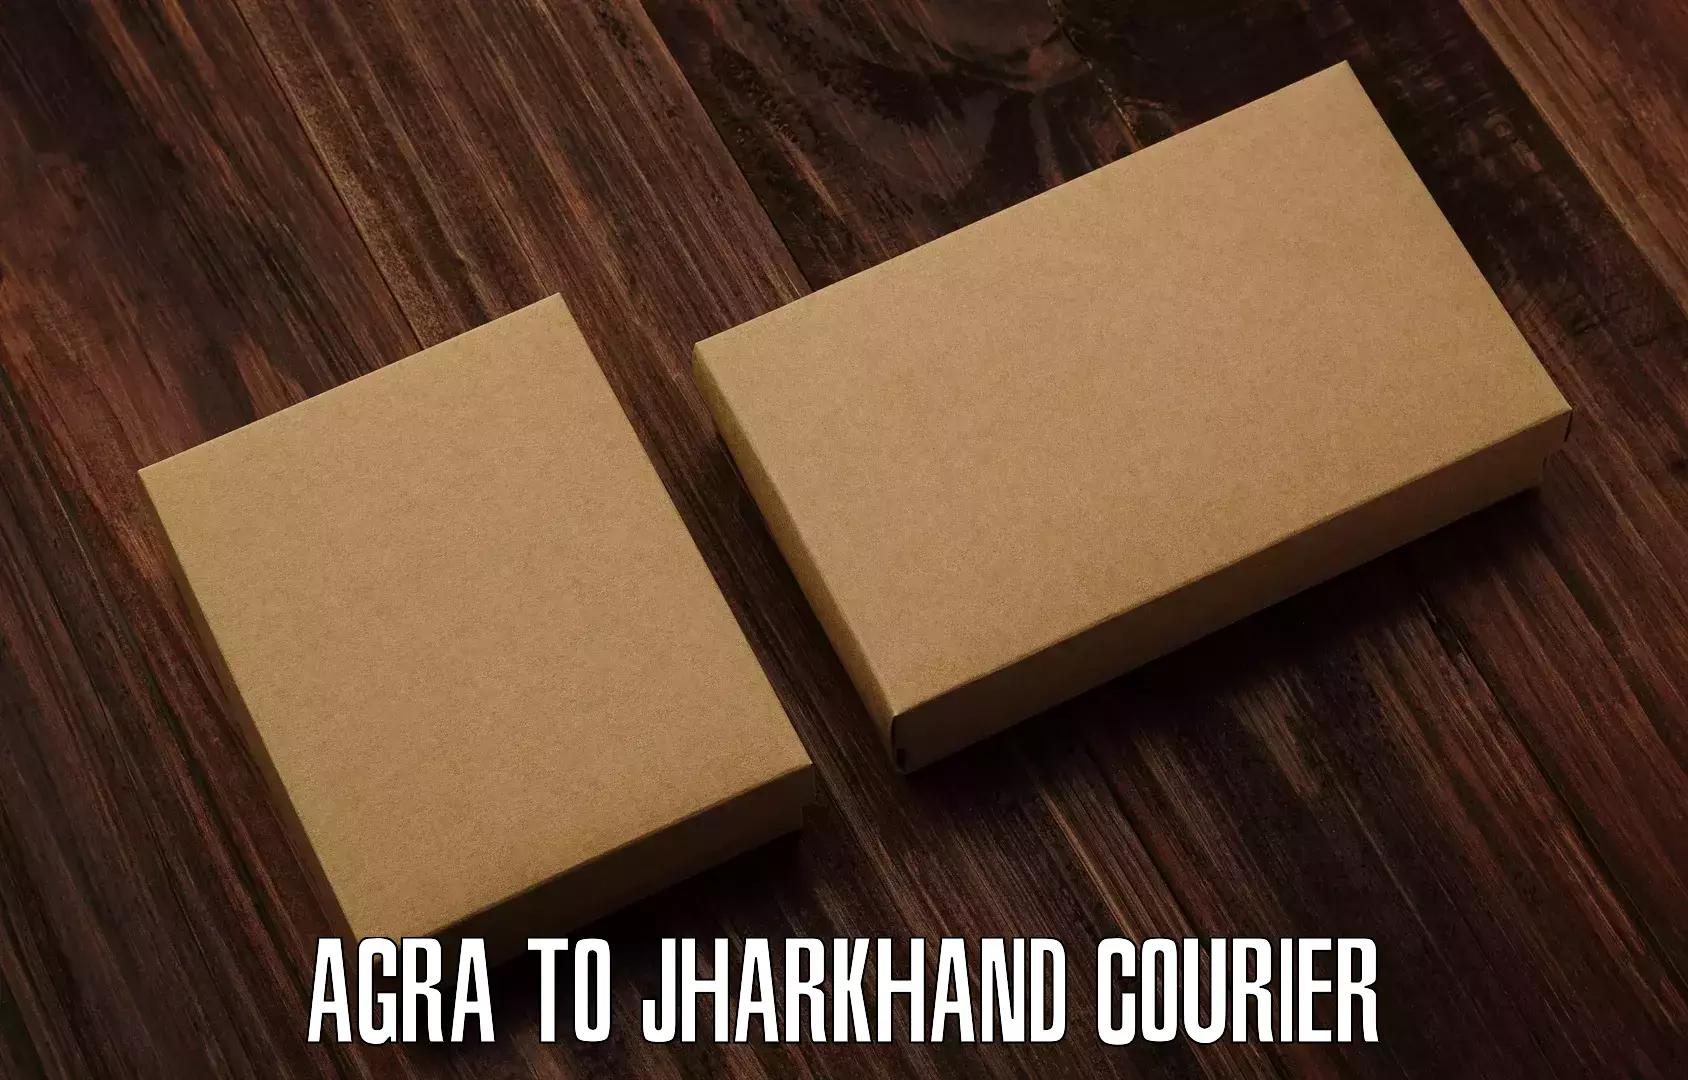 Package delivery network Agra to Medininagar